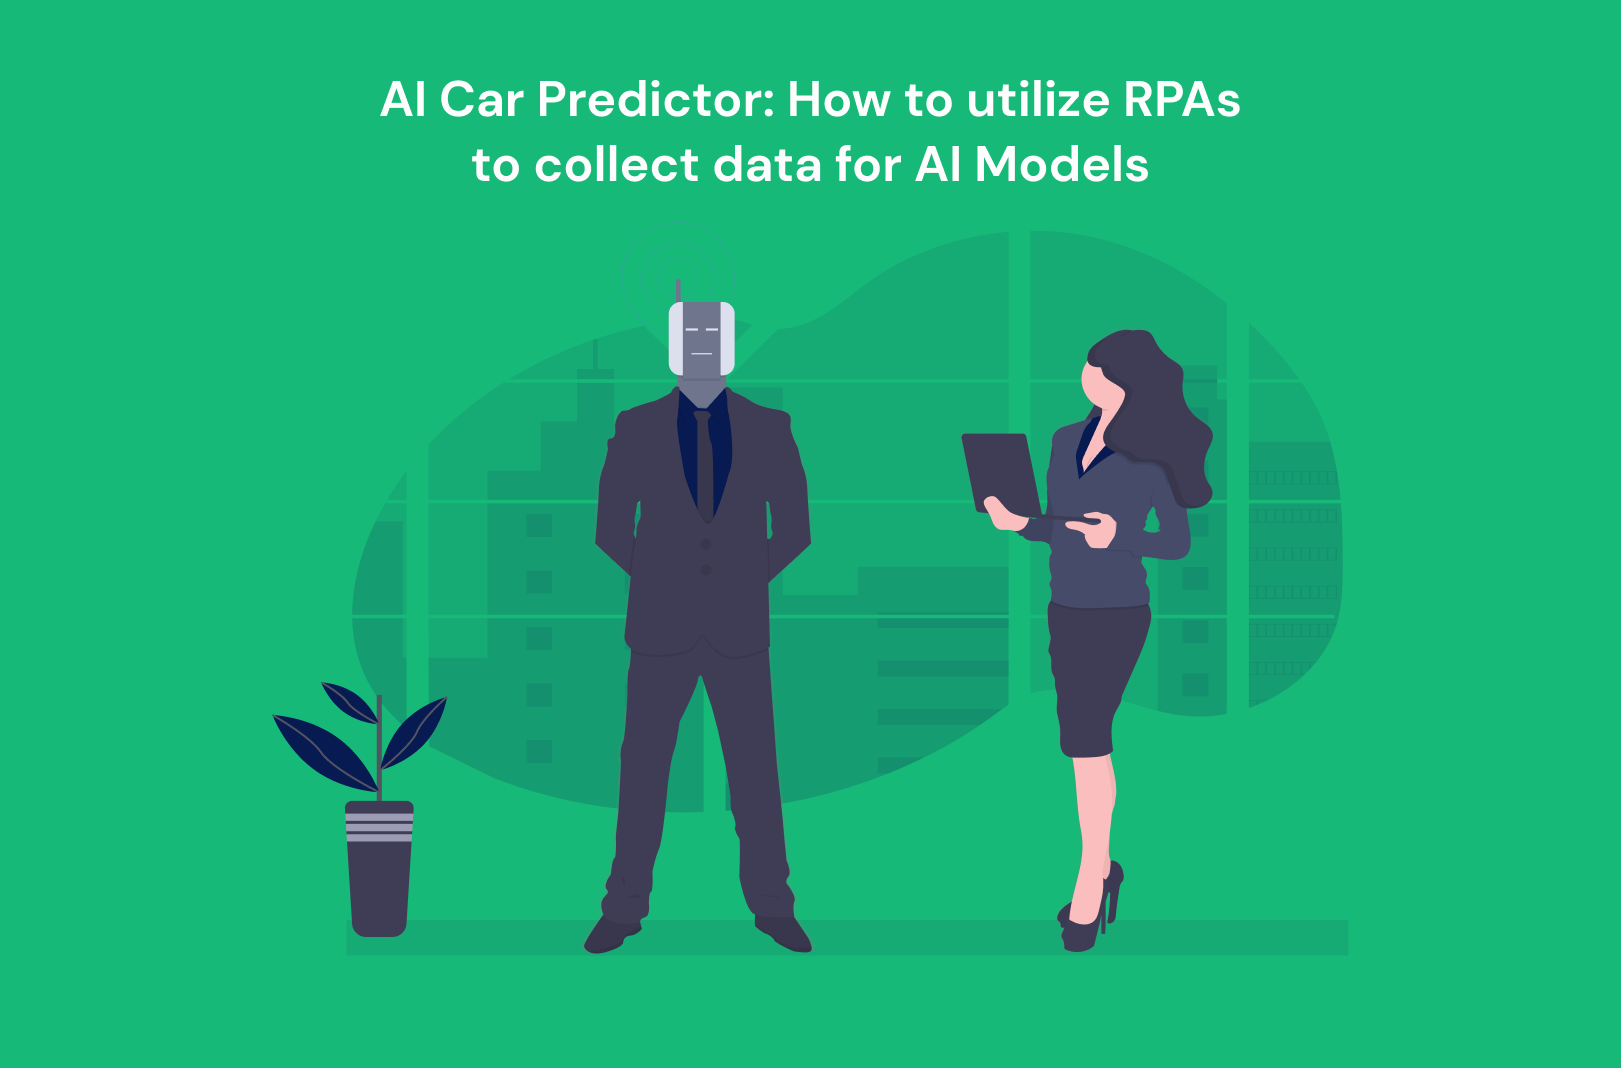 AI Car Predictor: How to utilize RPAs to collect data for AI Models